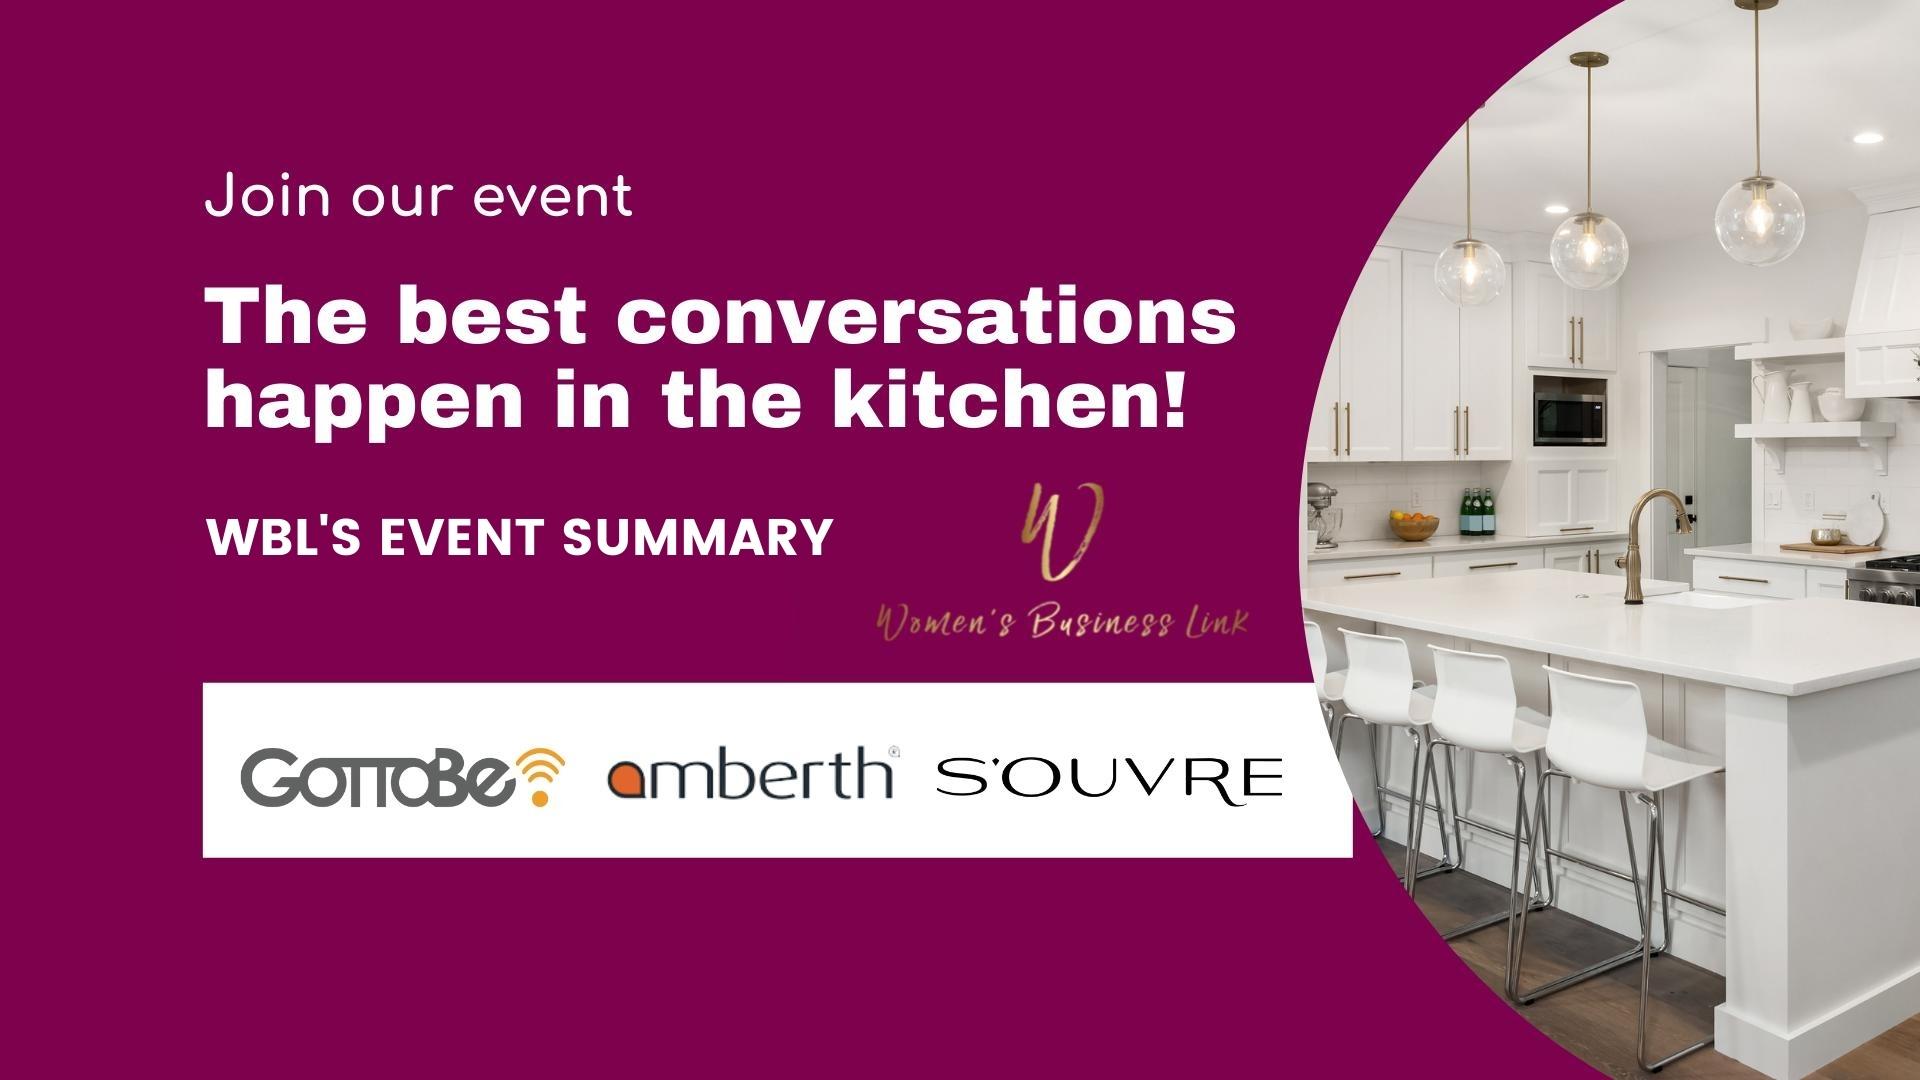 WBL’s Summary of event Best Conversations happen in the Kitchen.